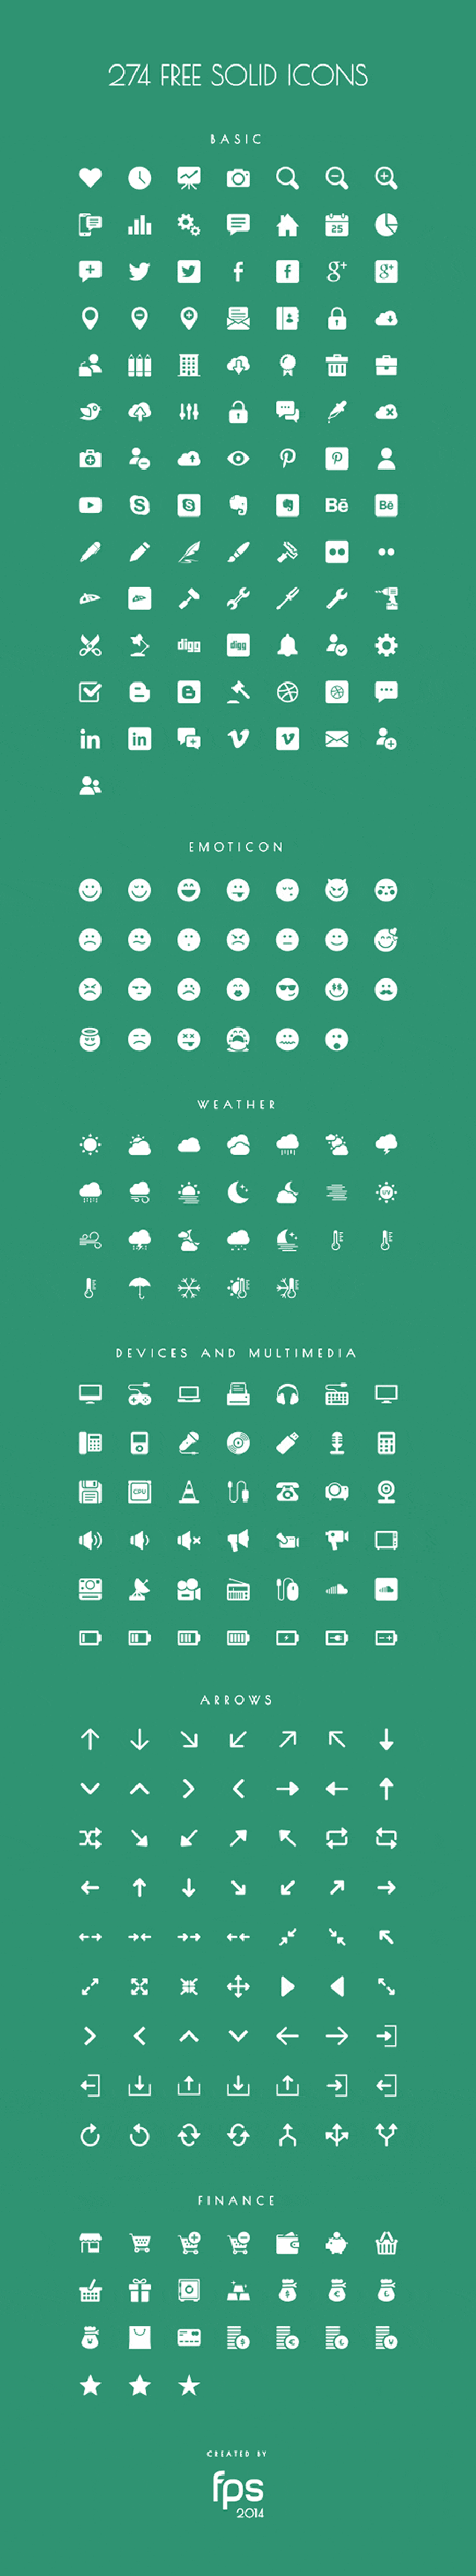 solid icons - Free icon sets